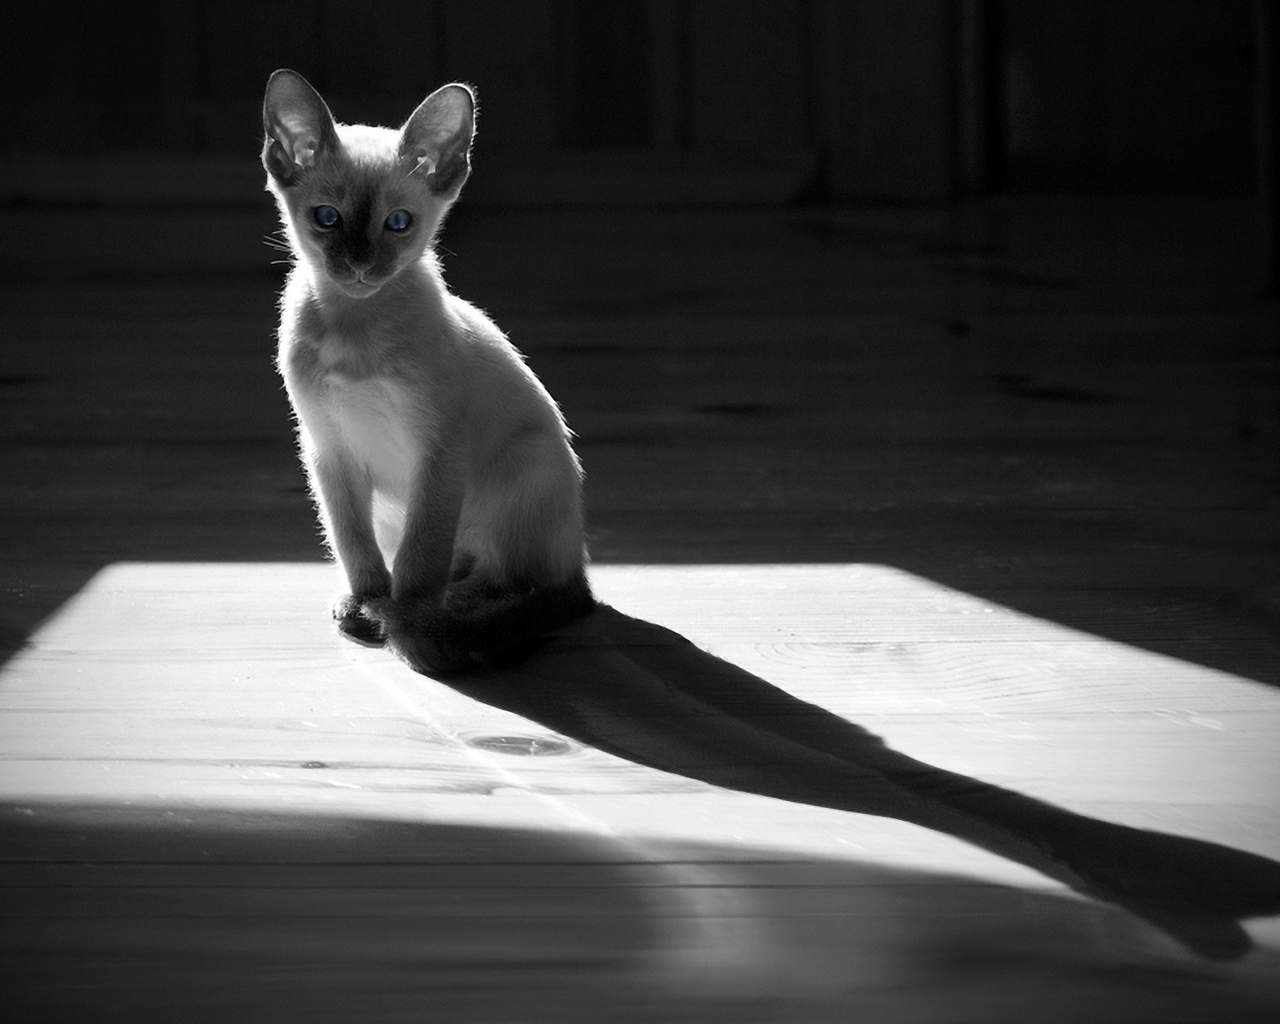 Image: Cat, blue eyes, shadow, black and white